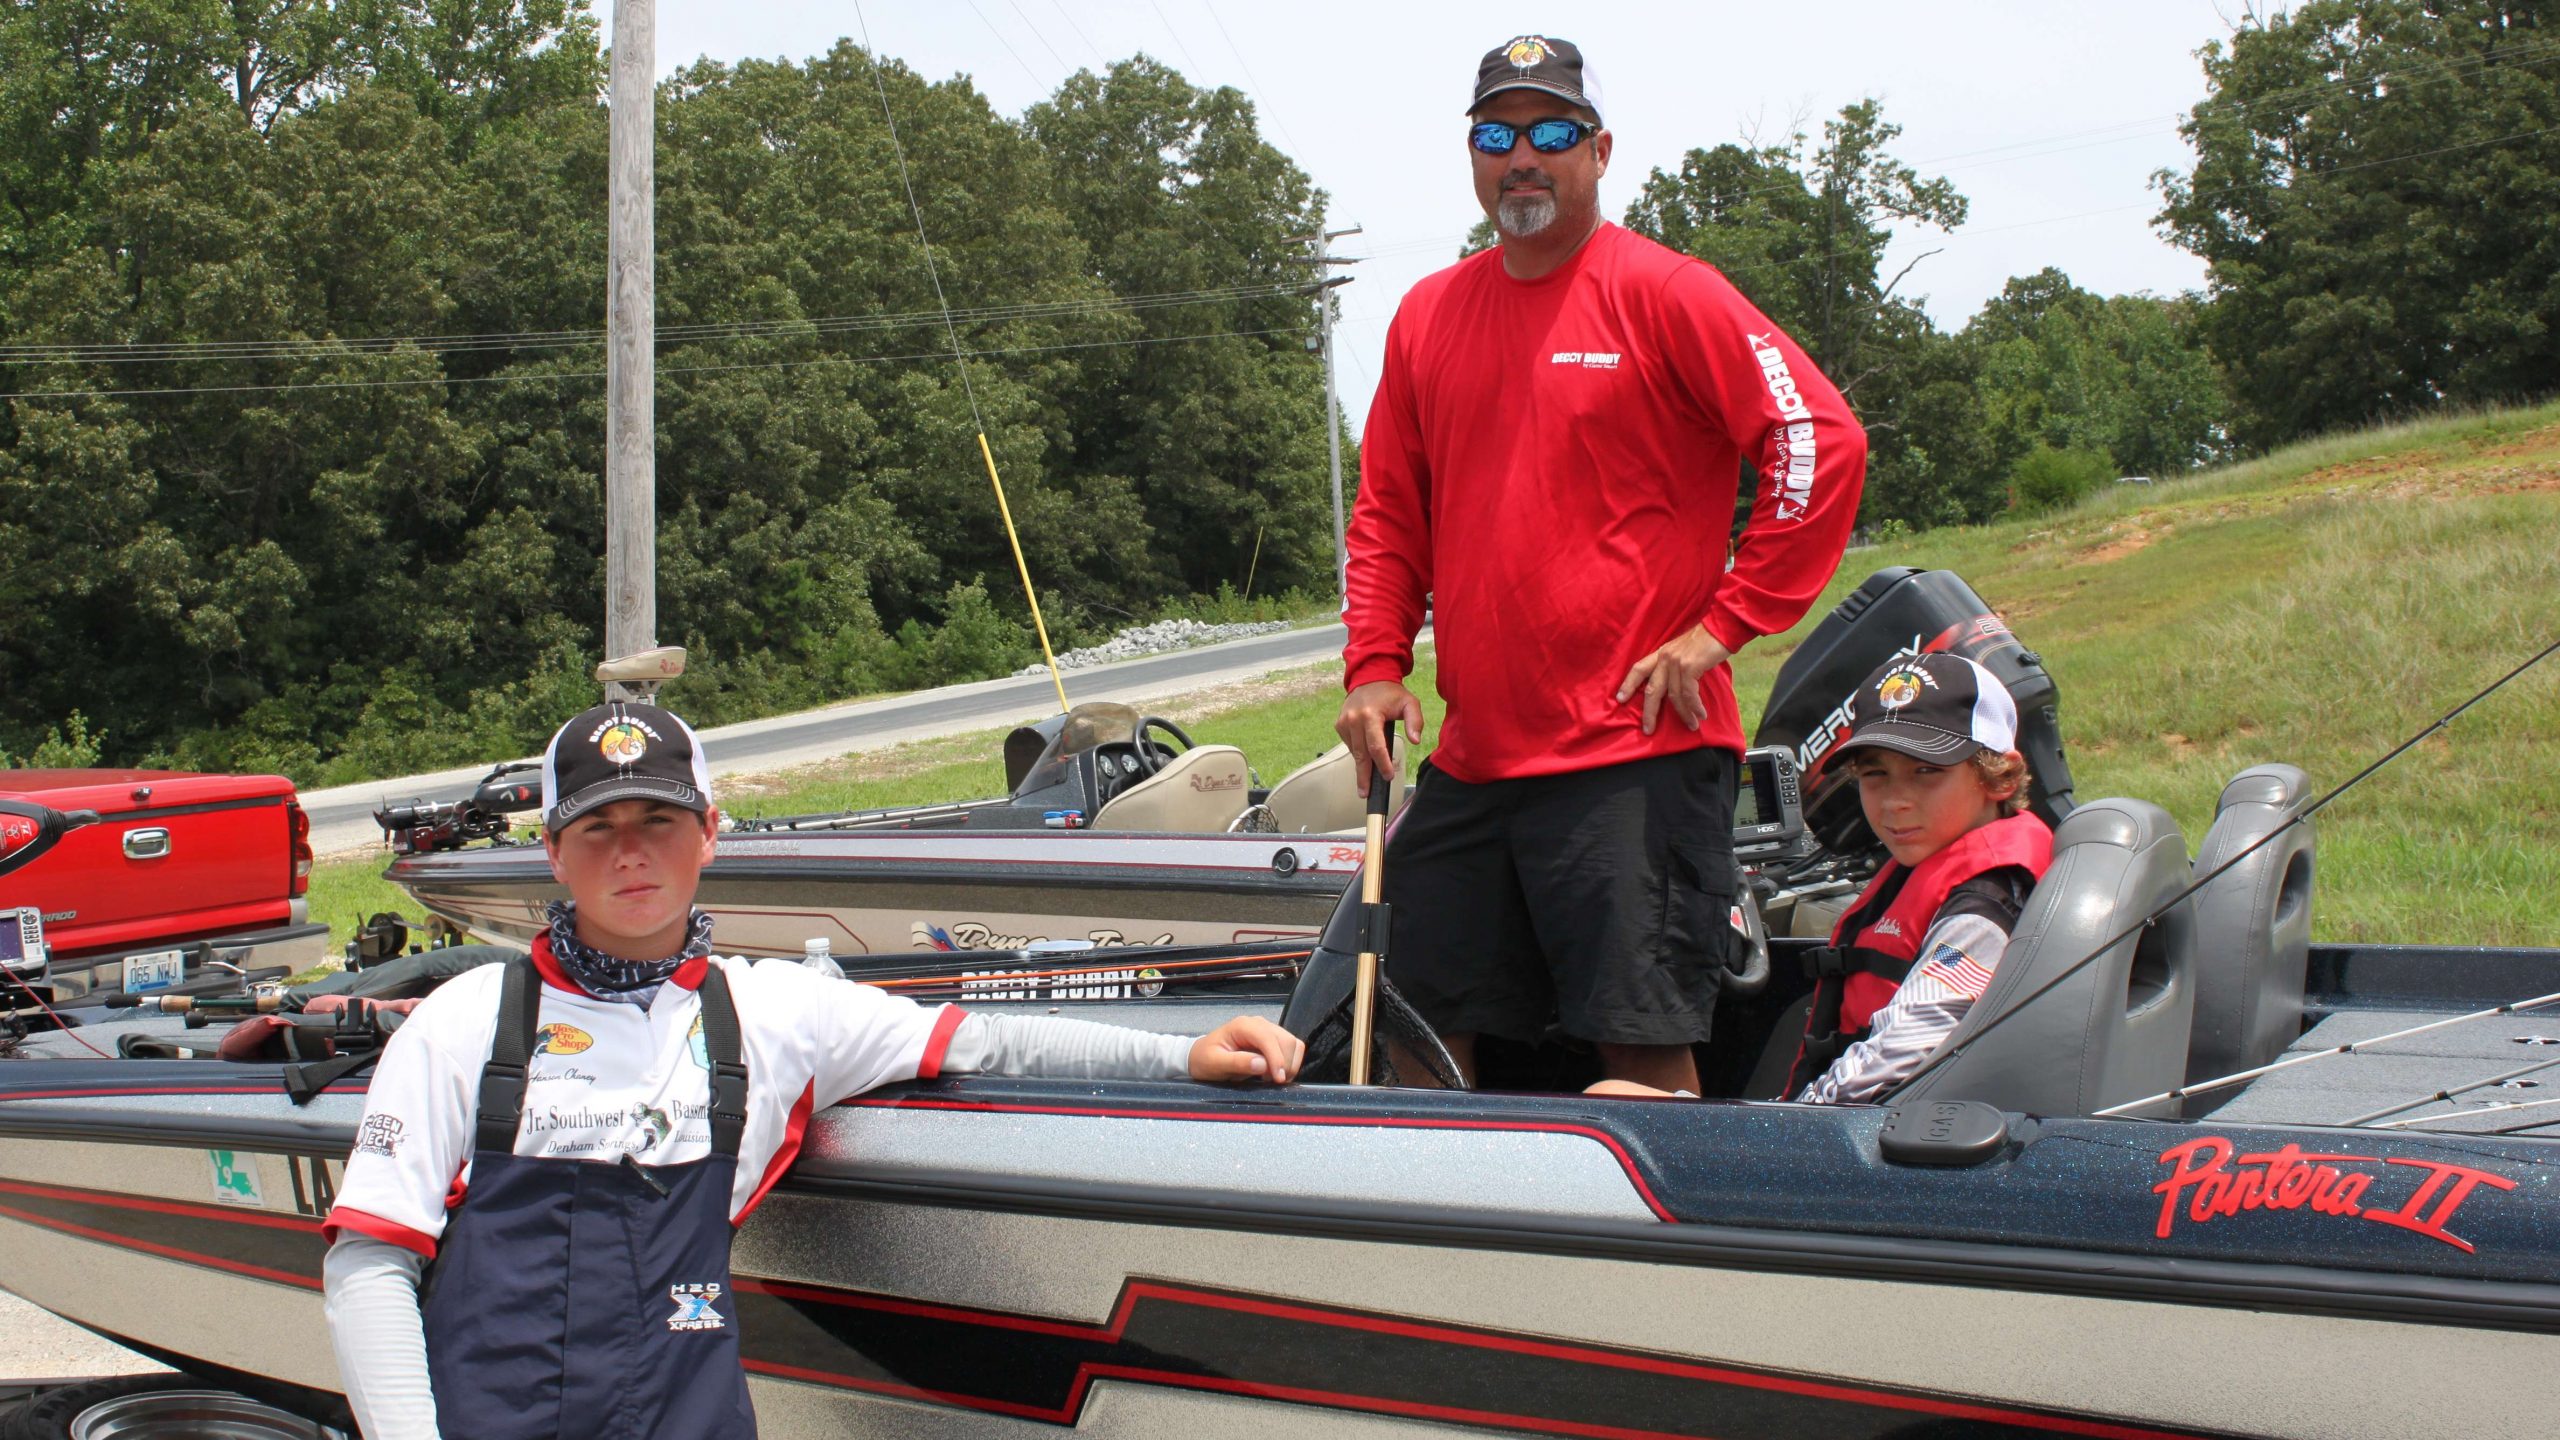 Team Louisiana gets off the water. From left are Hanson Chaney, John Chaney, and Jackson Landry.